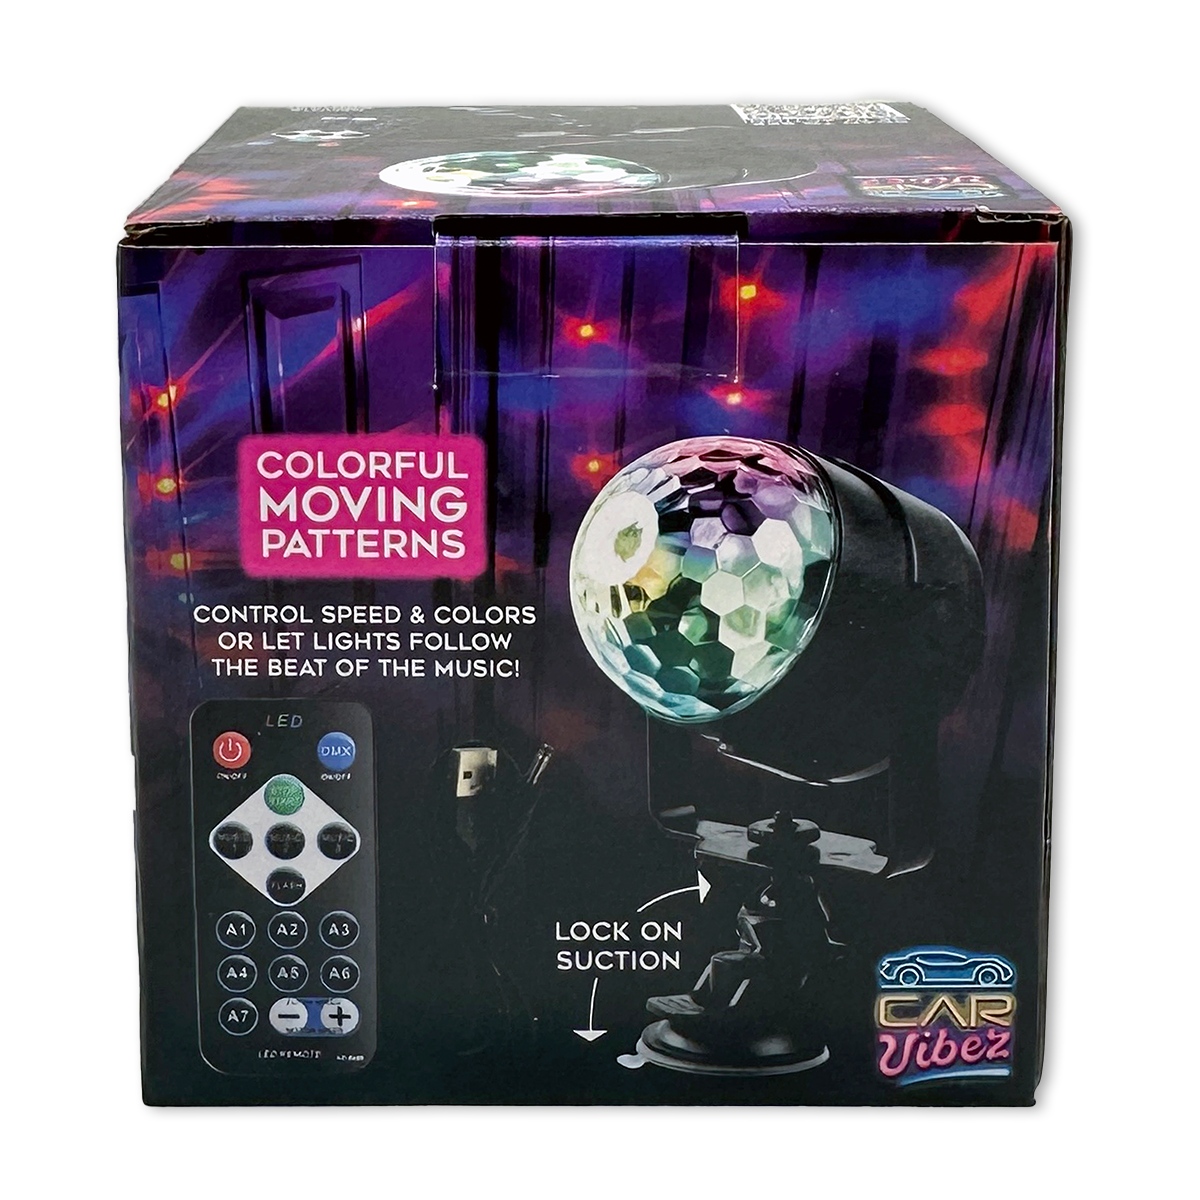 ITEM NUMBER 023575 USB SUCTION DISCO BALL 4 PIECES PER DISPLAY